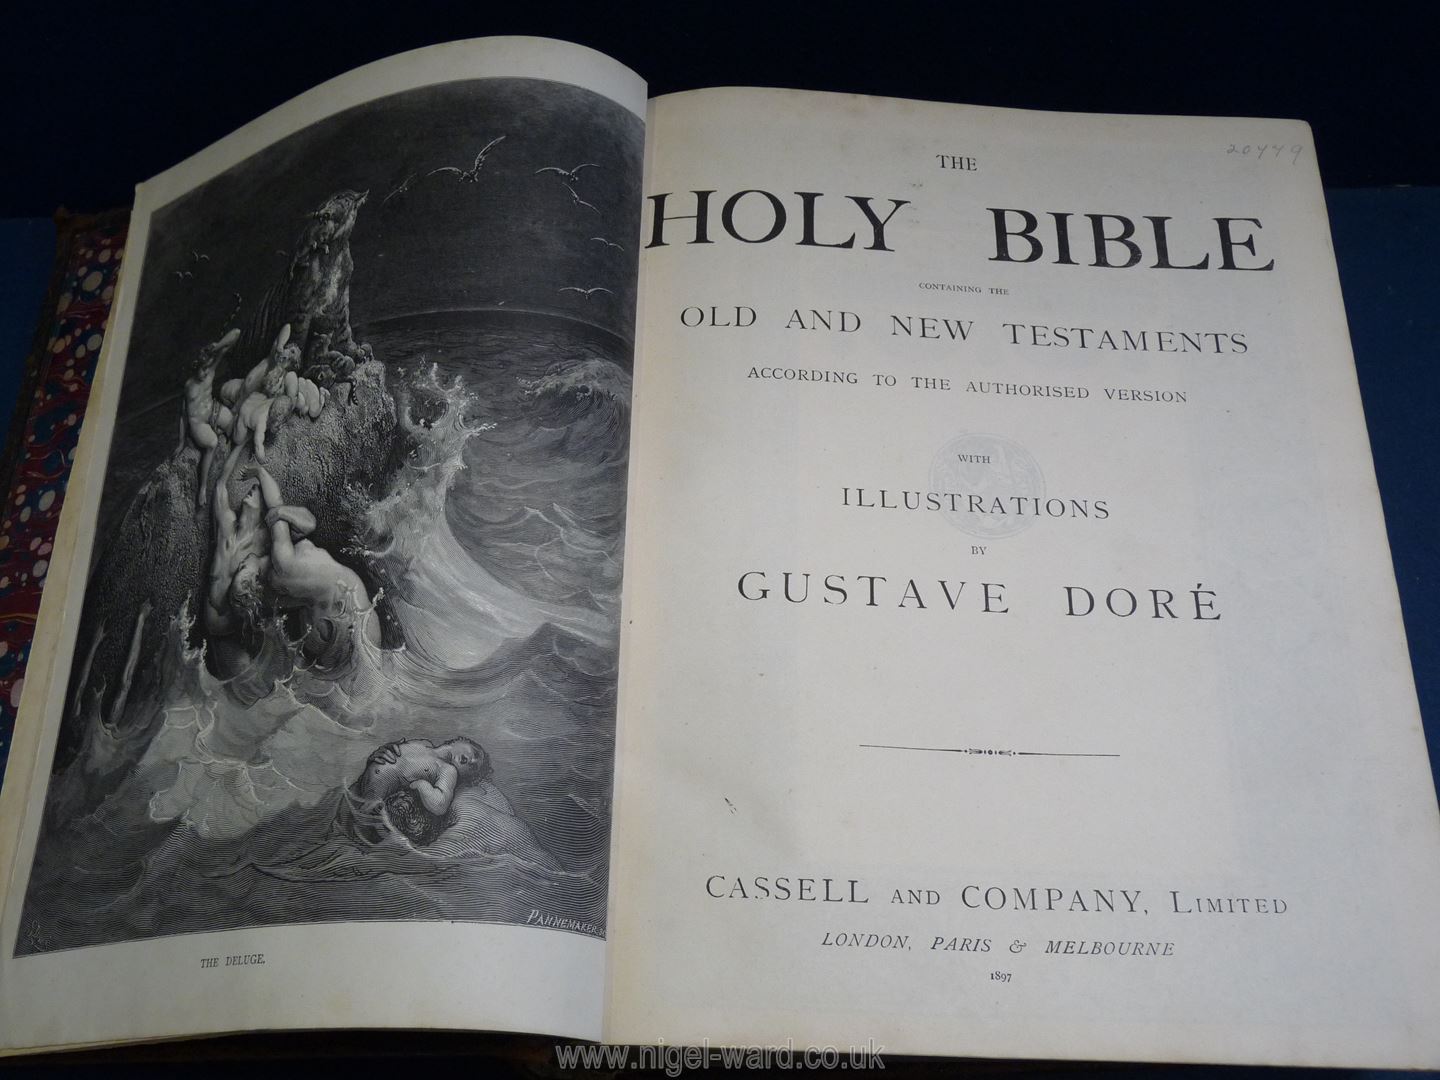 A volume - The Holy Bible with illustrations by Gustave Dore 1897 with blank family register and